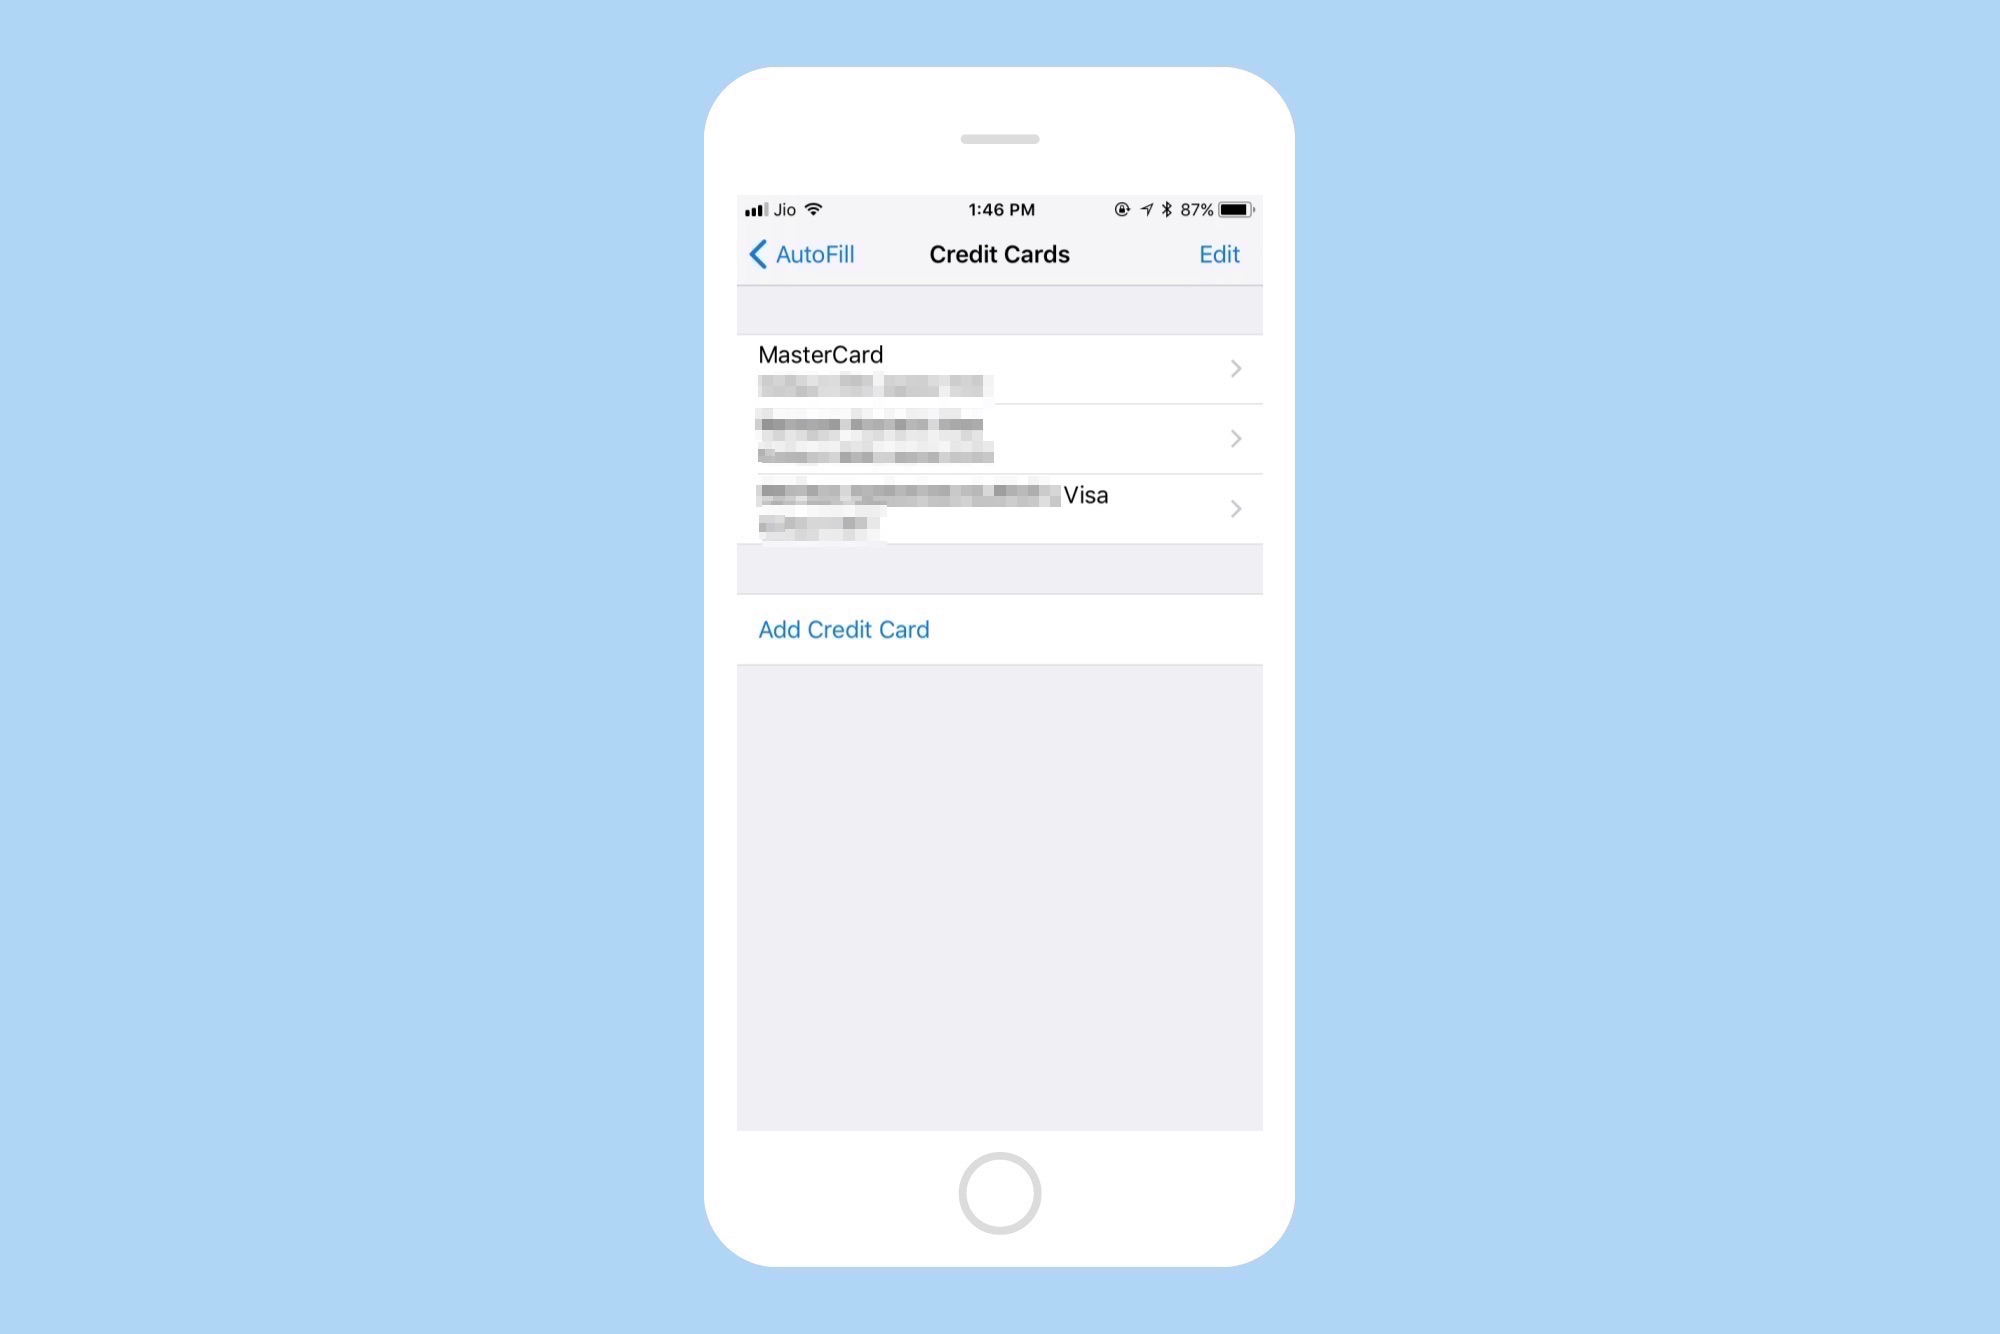 saved credit card details on iPhone